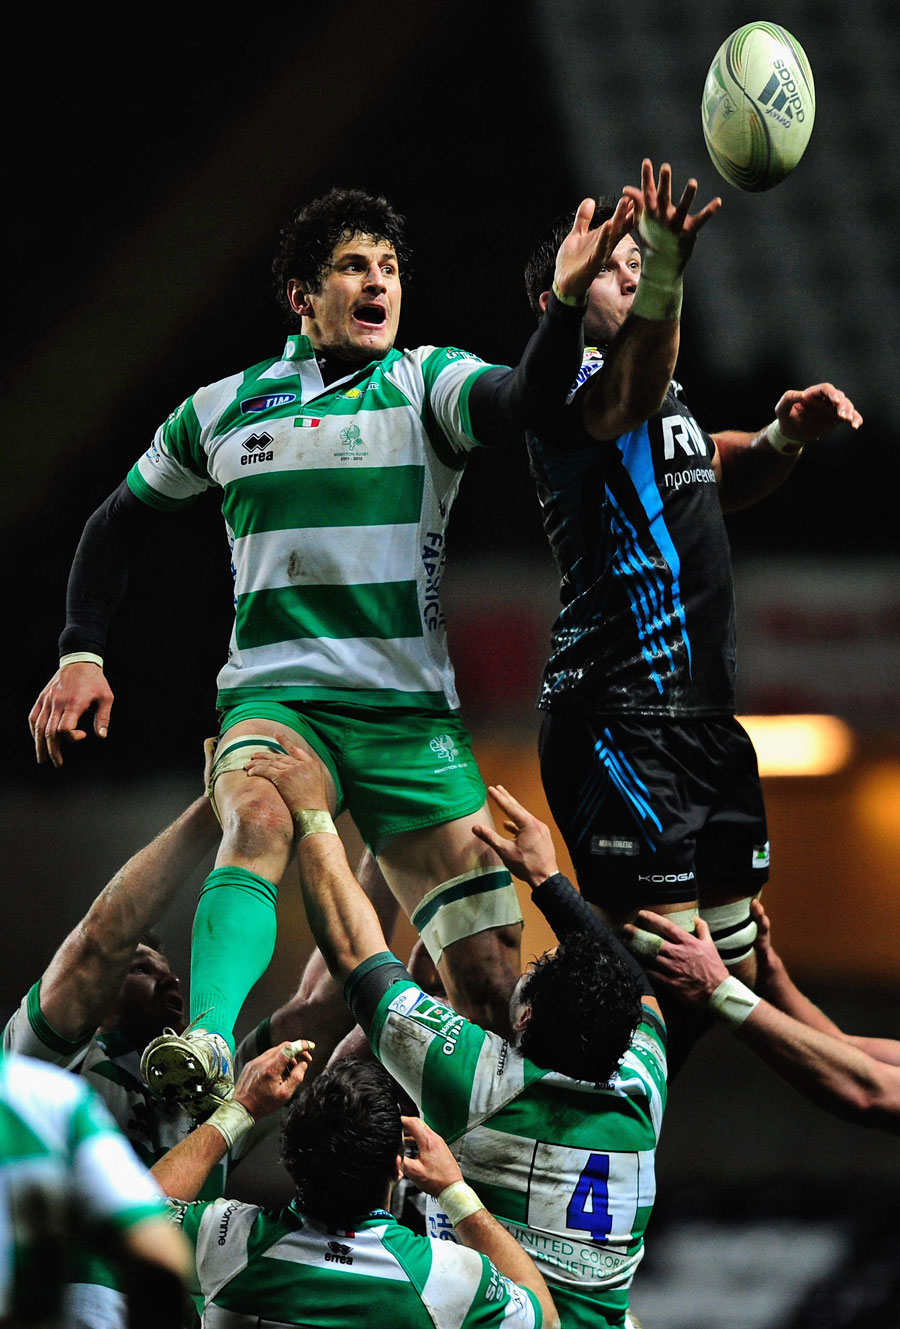 Treviso's Alessandro Zanni competes for a lineout